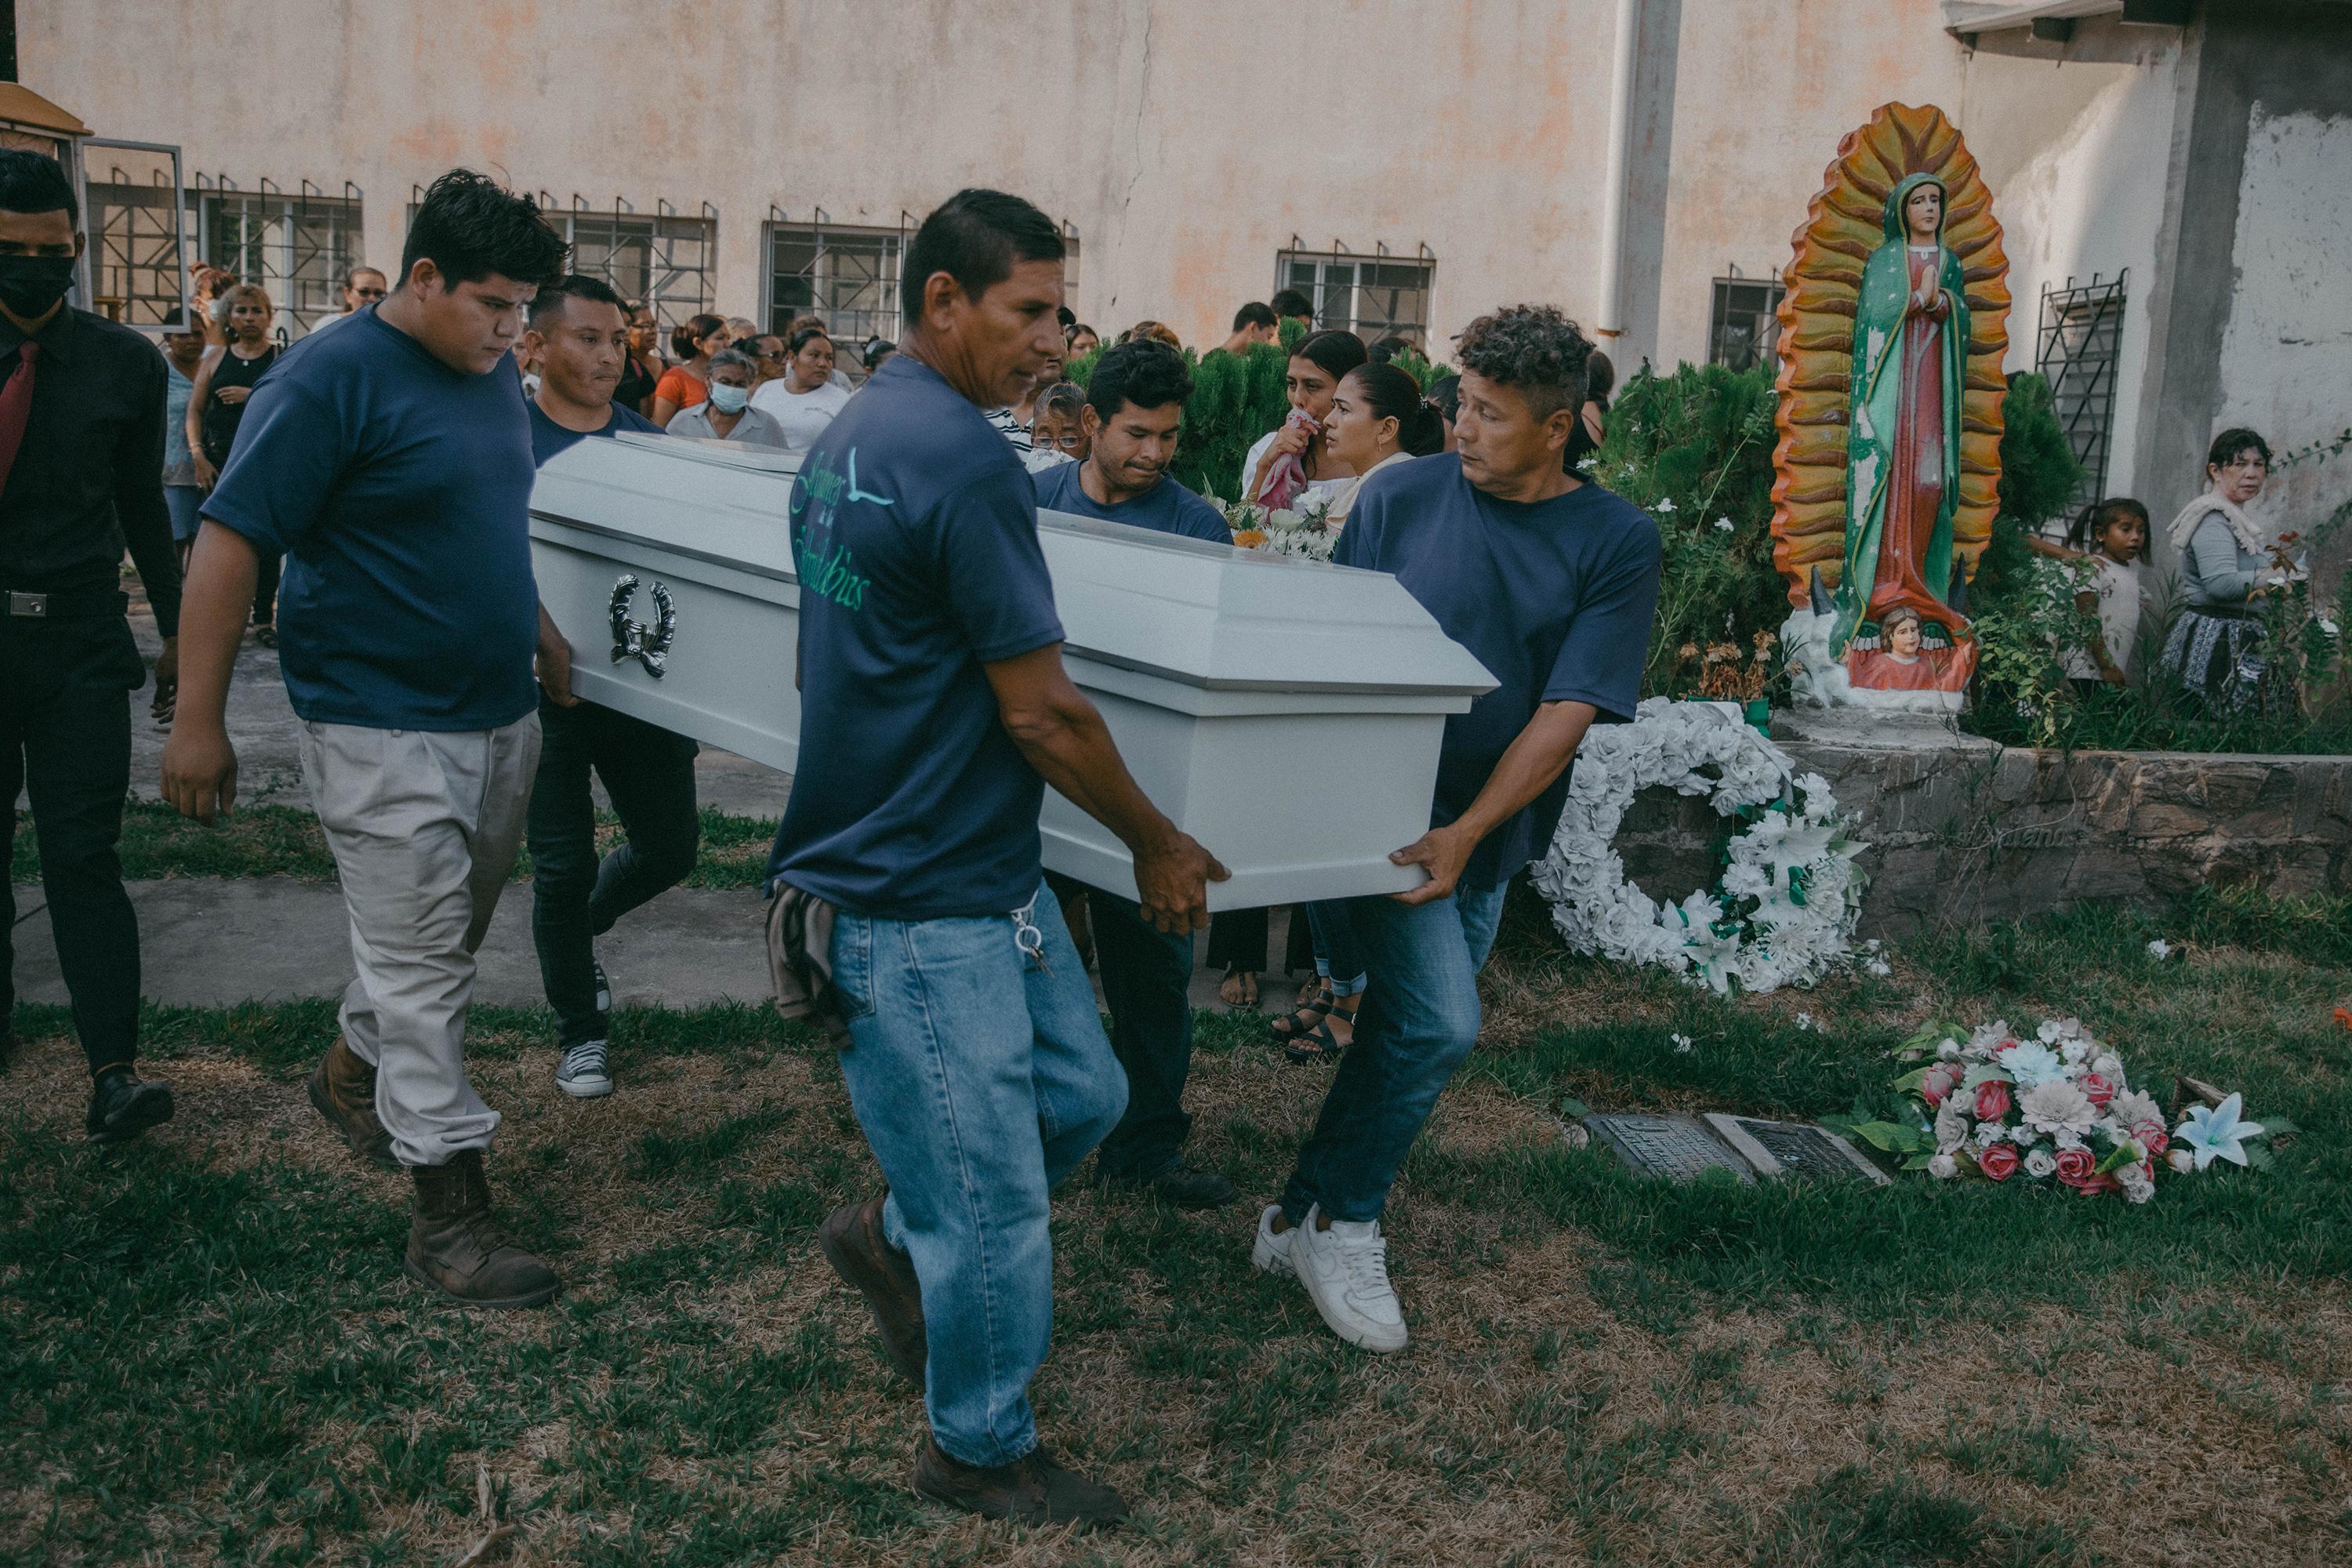 Funeral home workers carry a coffin containing the remains of Rodrigo Vásquez, 44 years old, who was detained on May 9, 2022 under the state of exception and died in Izalco Prison. According to the forensics report, the cause of death was pneumonia. Photo: Carlos Barrera/El Faro